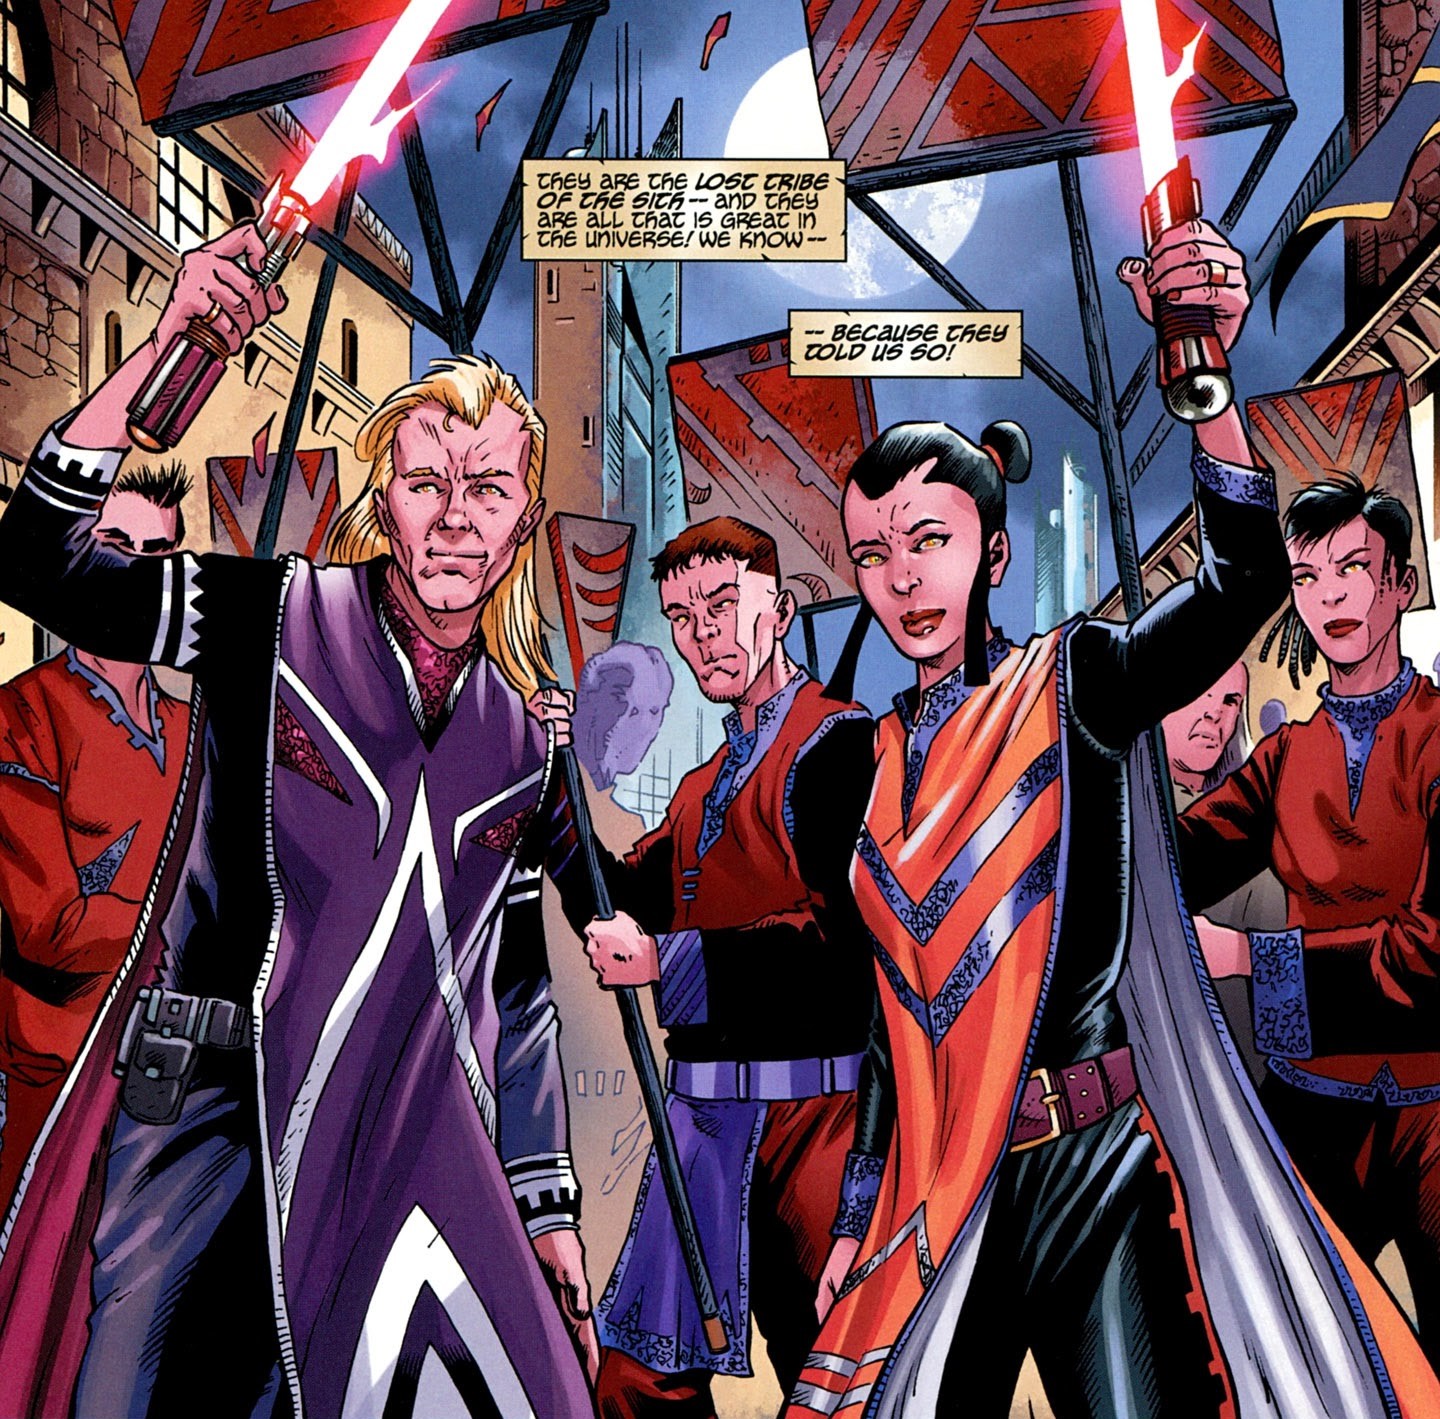 Star Wars: Lost Tribe of the Sith - Spiral Issue #4 - Read